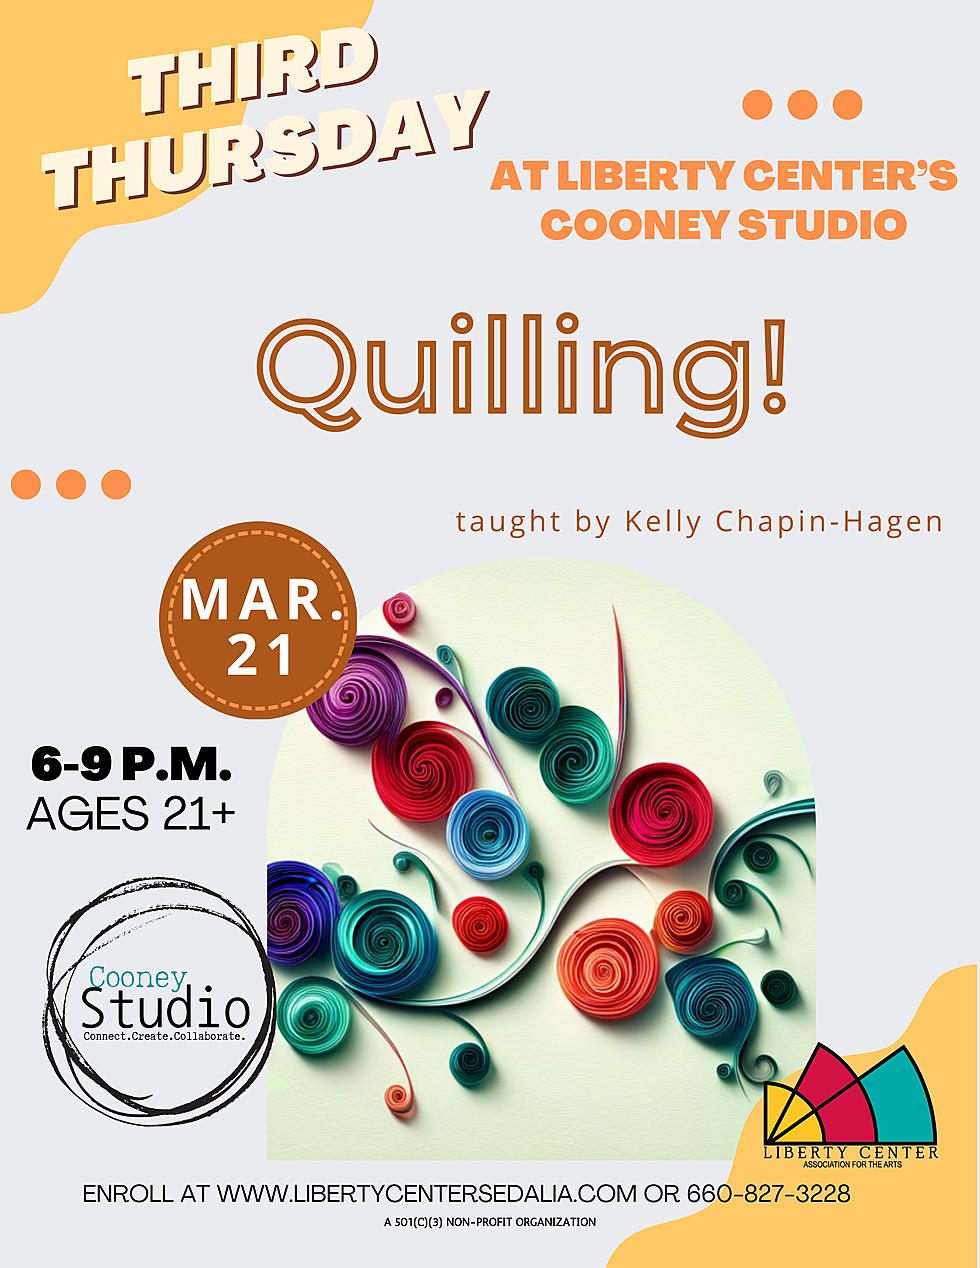 ‘Quilling’ Session Offered at Hayden Liberty Center